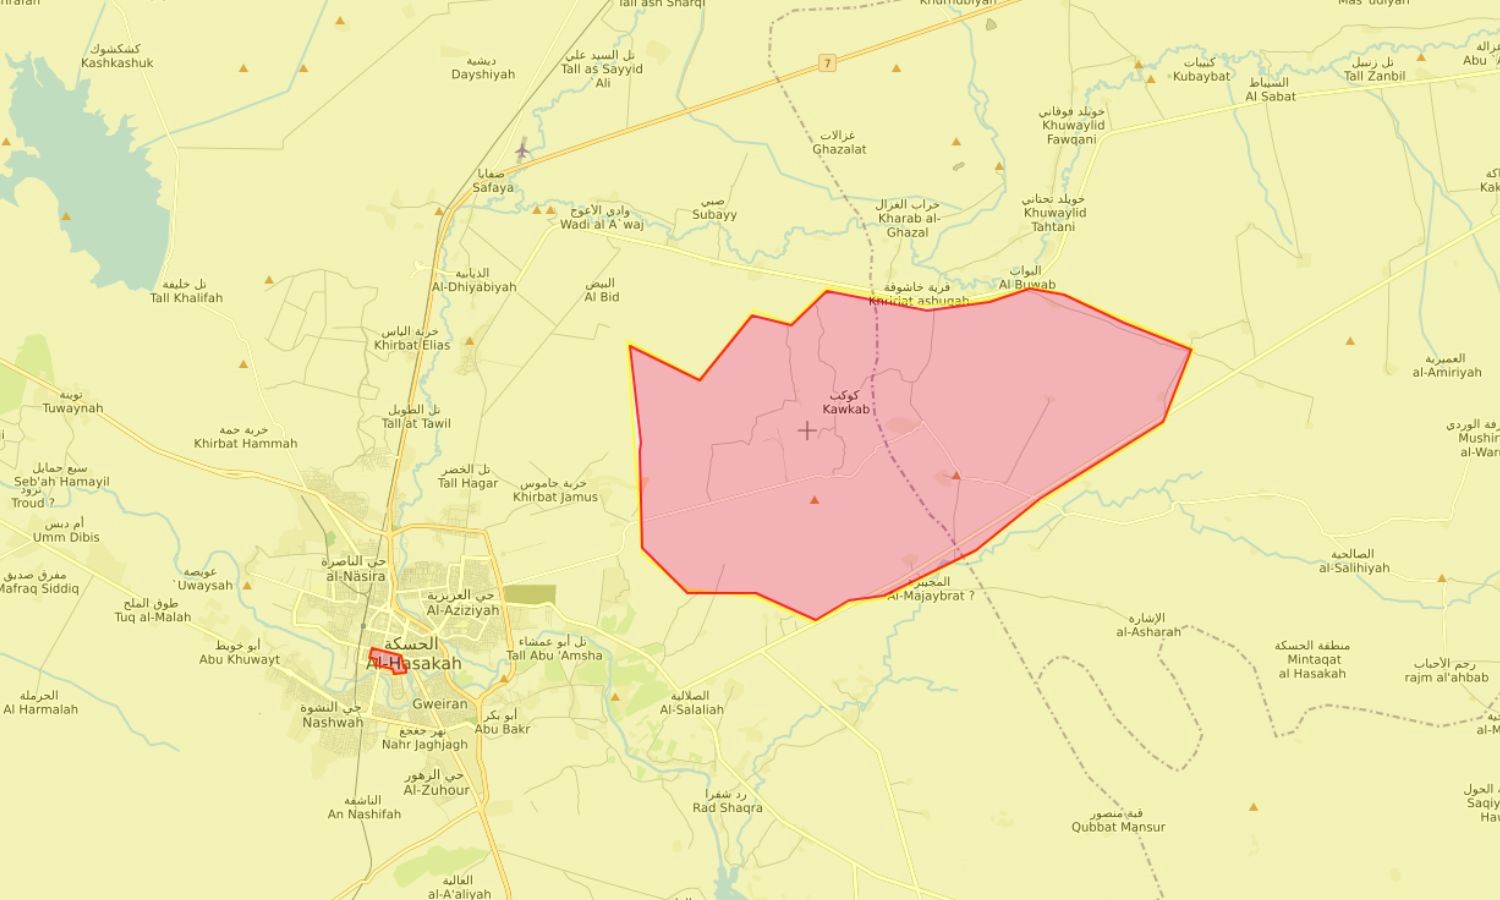 A map shows the security square, which includes a few streets in the city of al-Hasakah, next to Jabal Kawkab, which is controlled by the Syrian regime, east of the city itself, and the areas in yellow are where SDF is deployed.